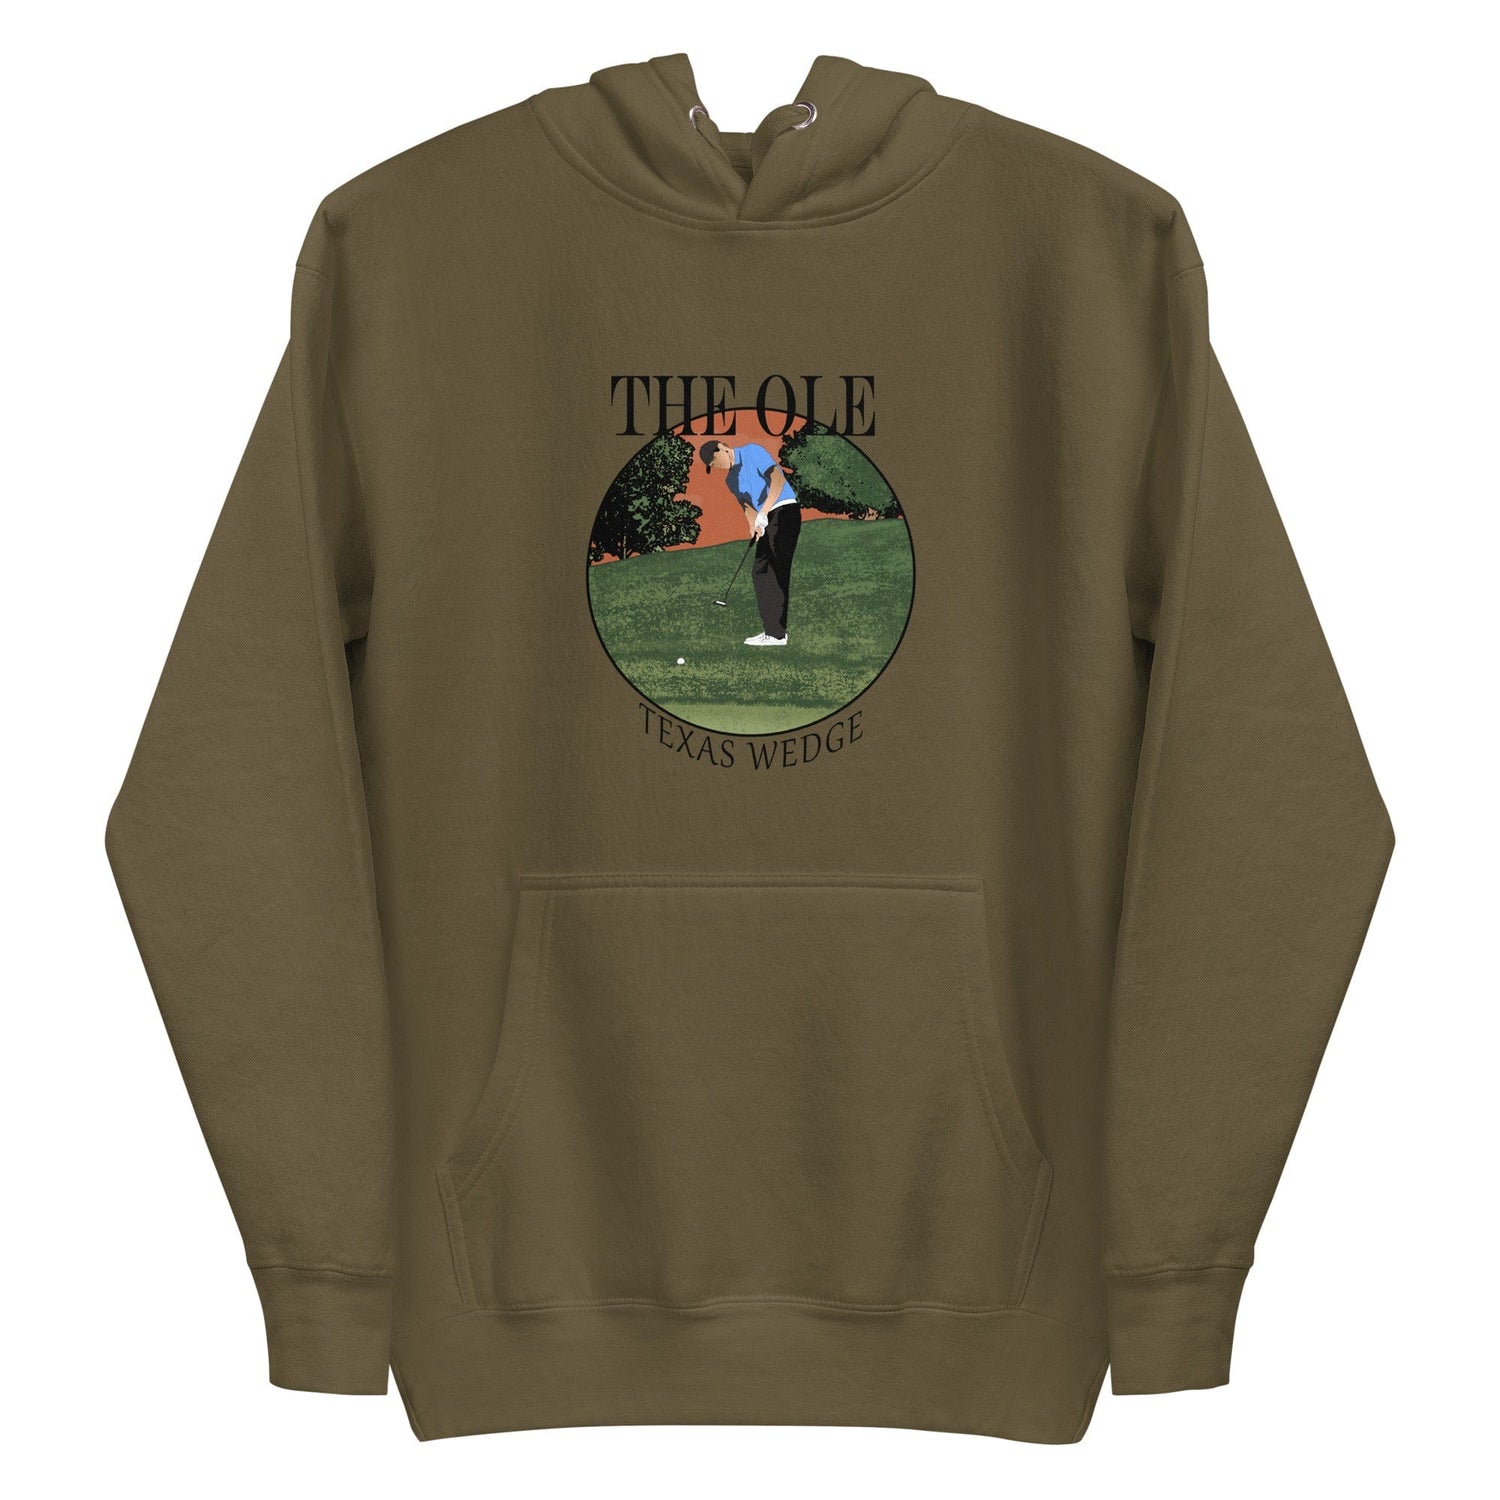 a Texas Wedge Hoodie with a picture of a golf player on it from Cart Jockey Golf.